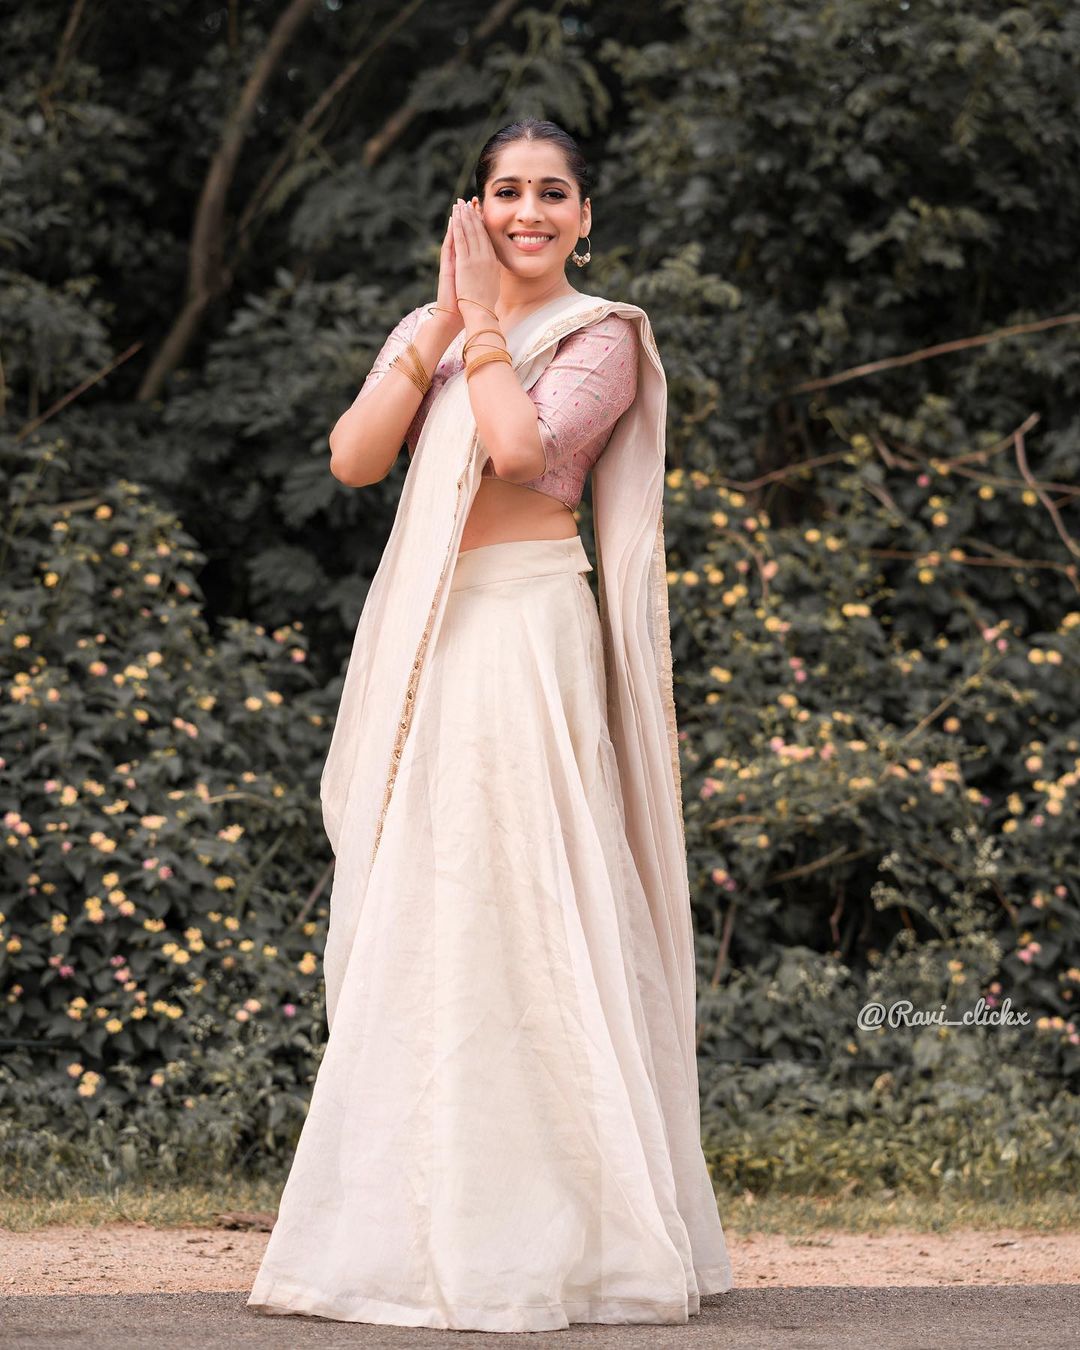 Actress rashmi gautam showing her navel in this awesome outfit-Actressrashmi, Rashmi Gautam Photos,Spicy Hot Pics,Images,High Resolution WallPapers Download